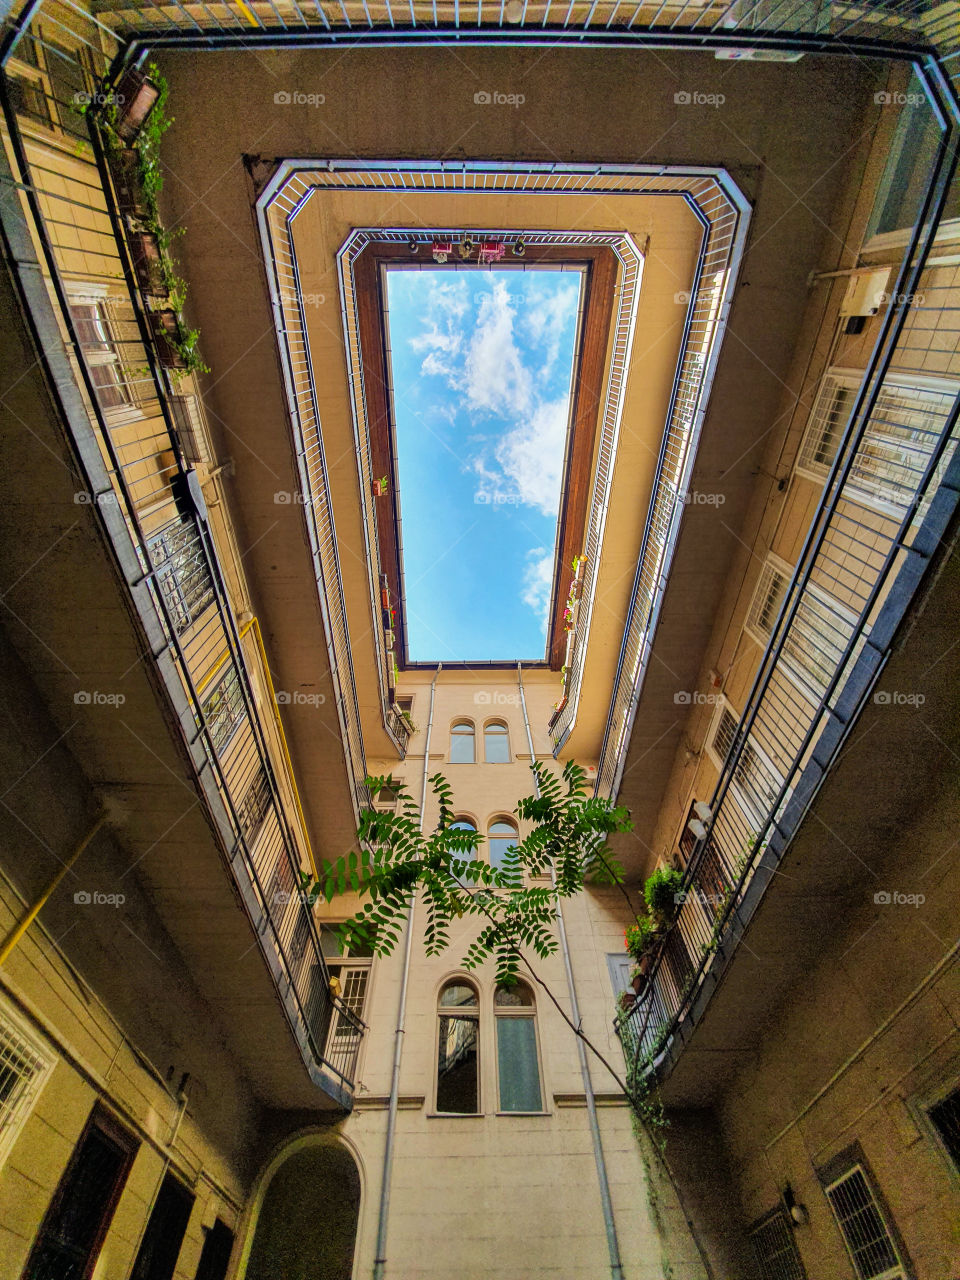 Bottom up view of the sky from an inner courtyard square of a building in Budapest. Geometric view of an inner square of a residential building.